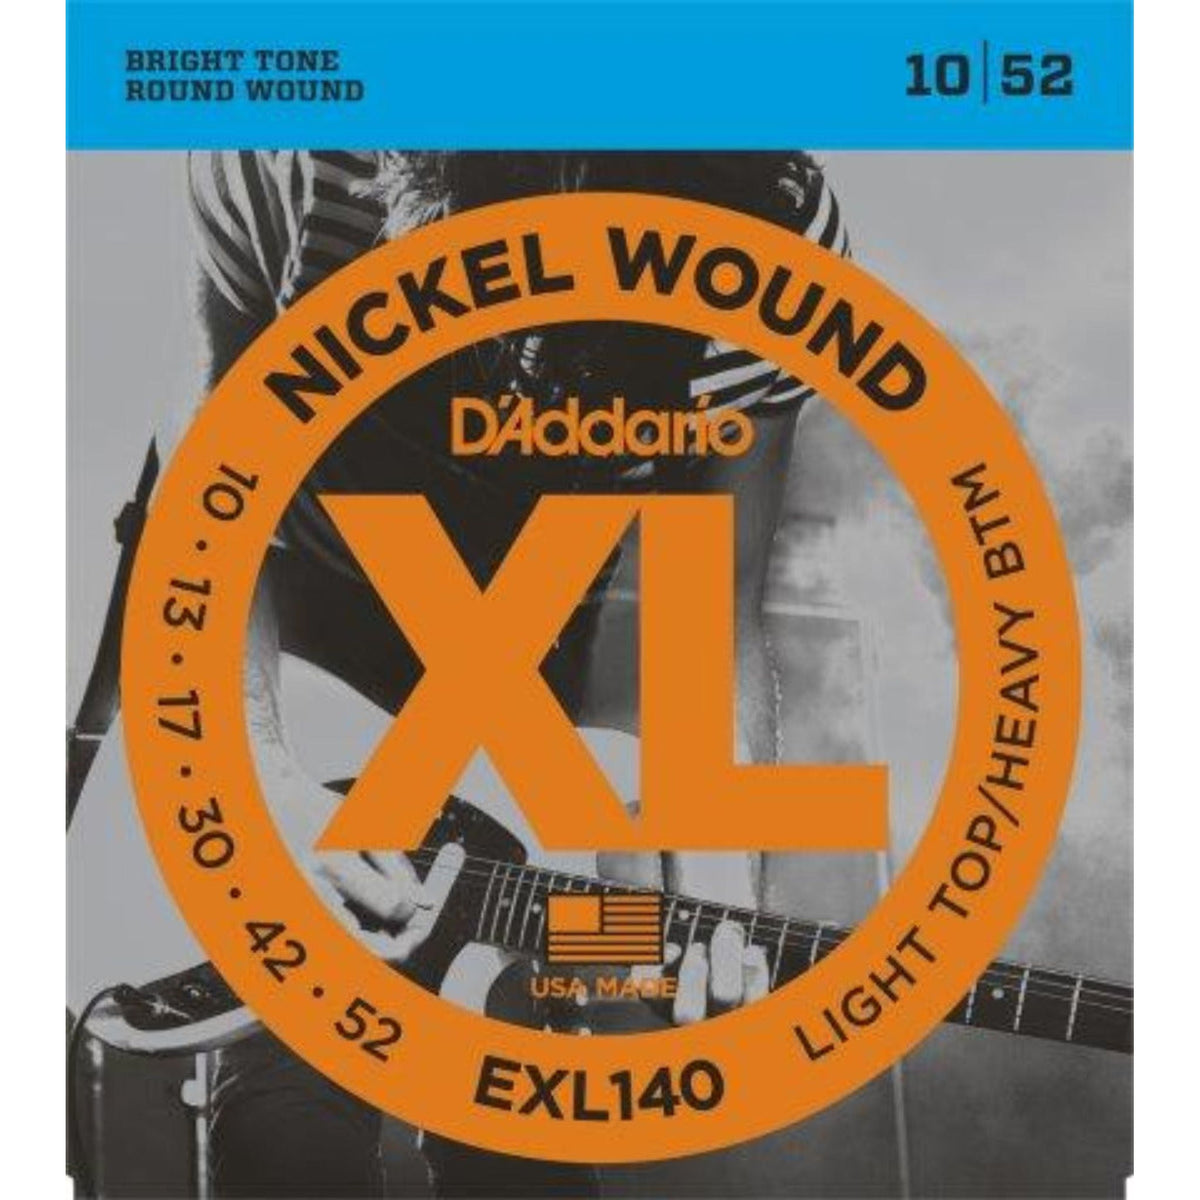 The D&#39;Addario EXL140&#39;s is one of D&#39;Addario&#39;s most popular hybrid sets. The combination of light highs and heavy lows delivers powerful low end for heavy chording and flexible plain steel strings for bending. Optimized for down or drop tuning!